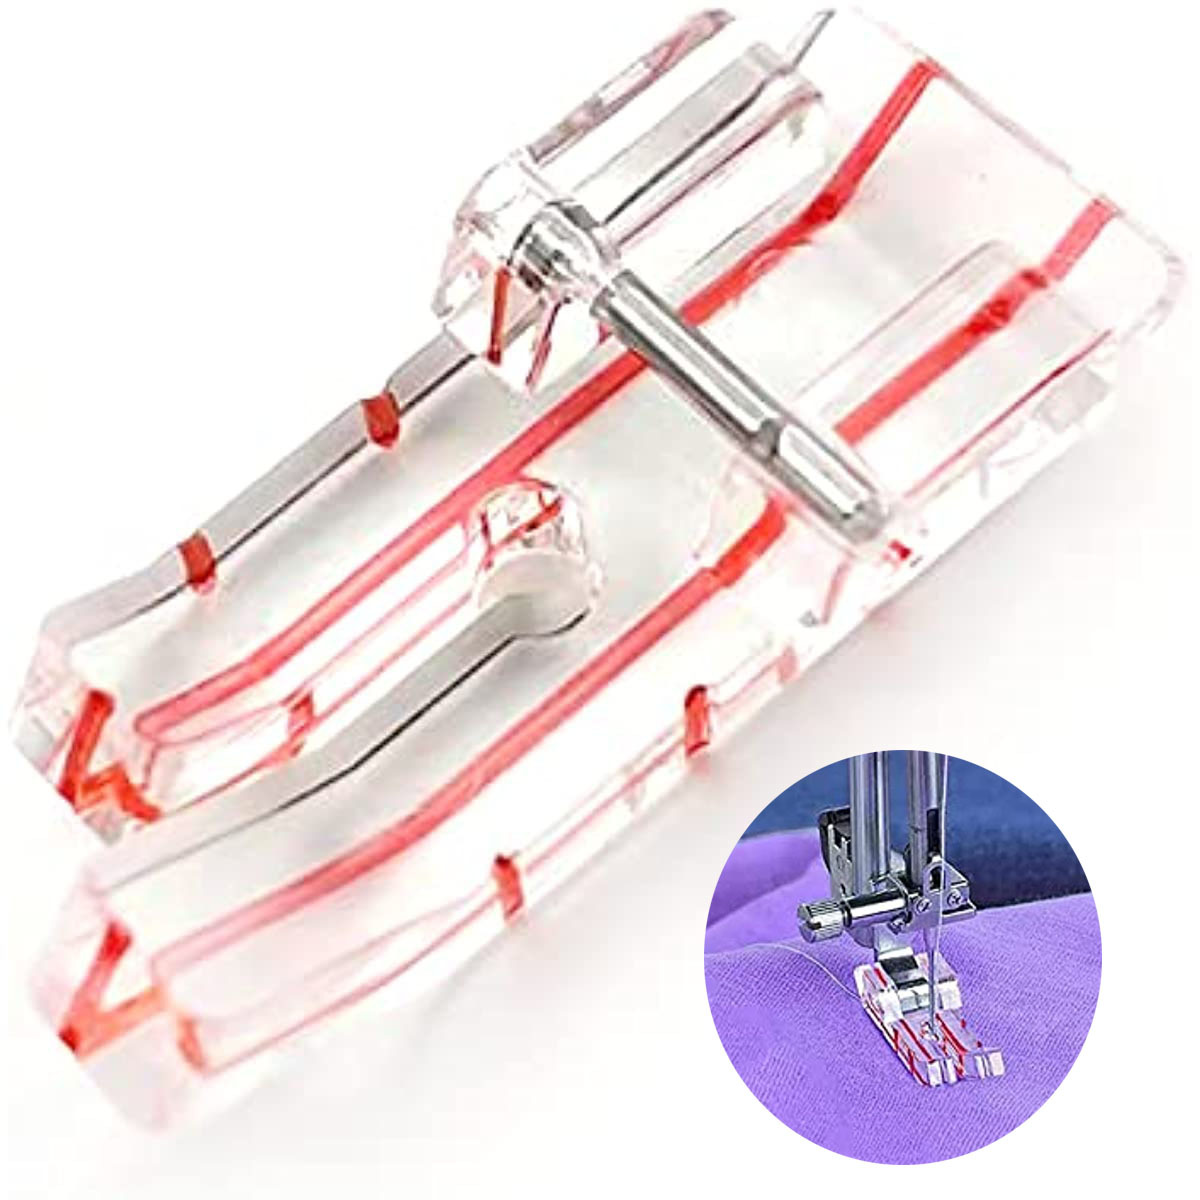 Distinctive Tape Binding Sewing Machine Presser Foot - Fits All Low Shank  Snap-On Singer* Brother, Babylock, Euro-Pro, Janome, Kenmore, White, Juki